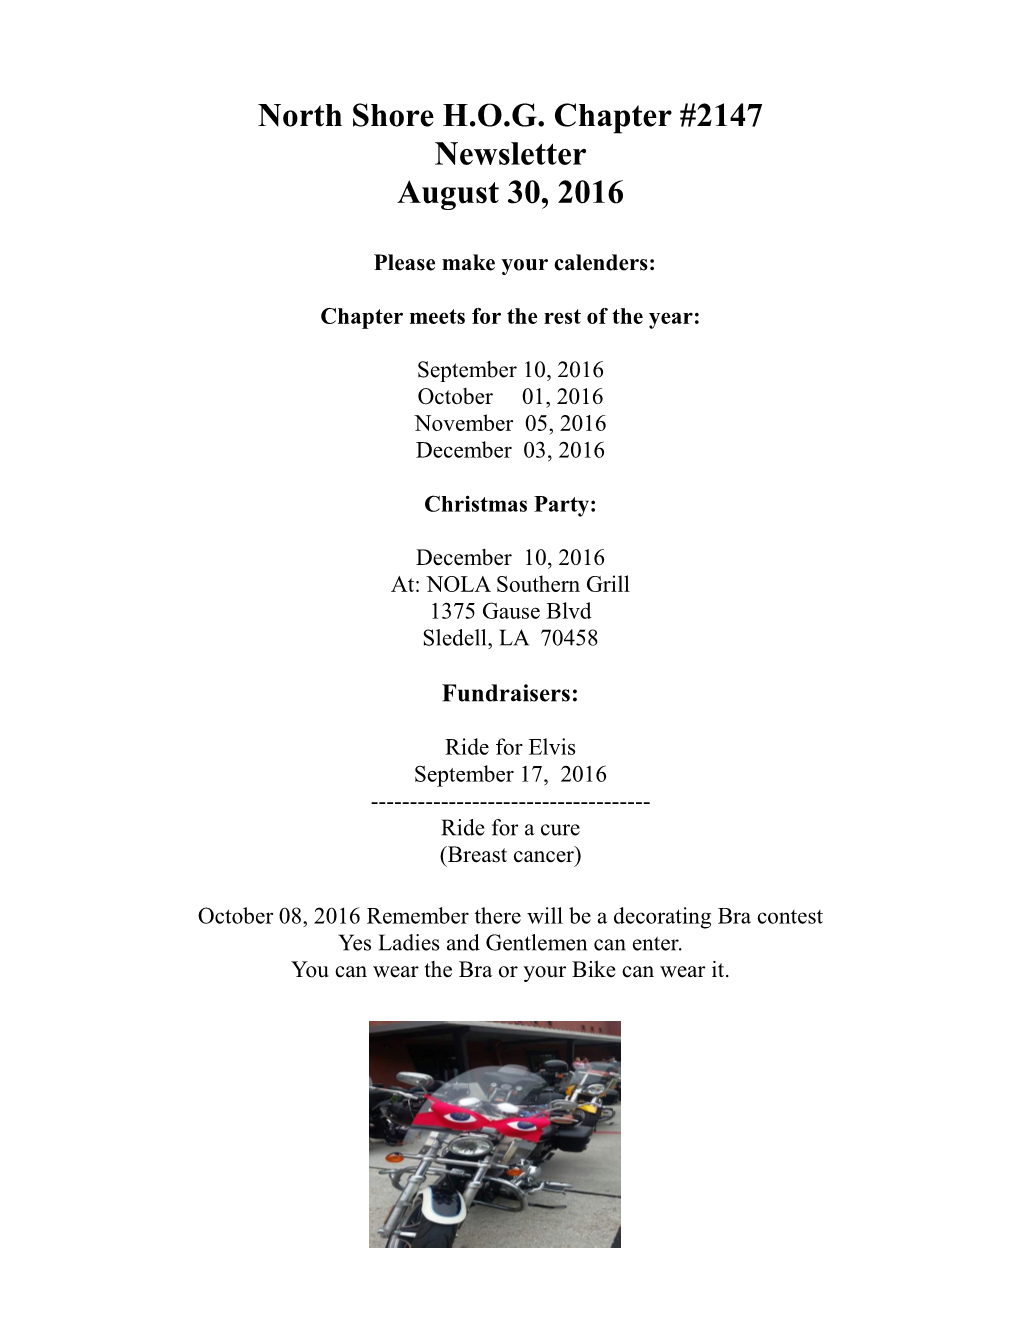 North Shore H.O.G. Chapter #2147 Newsletter August 30, 2016